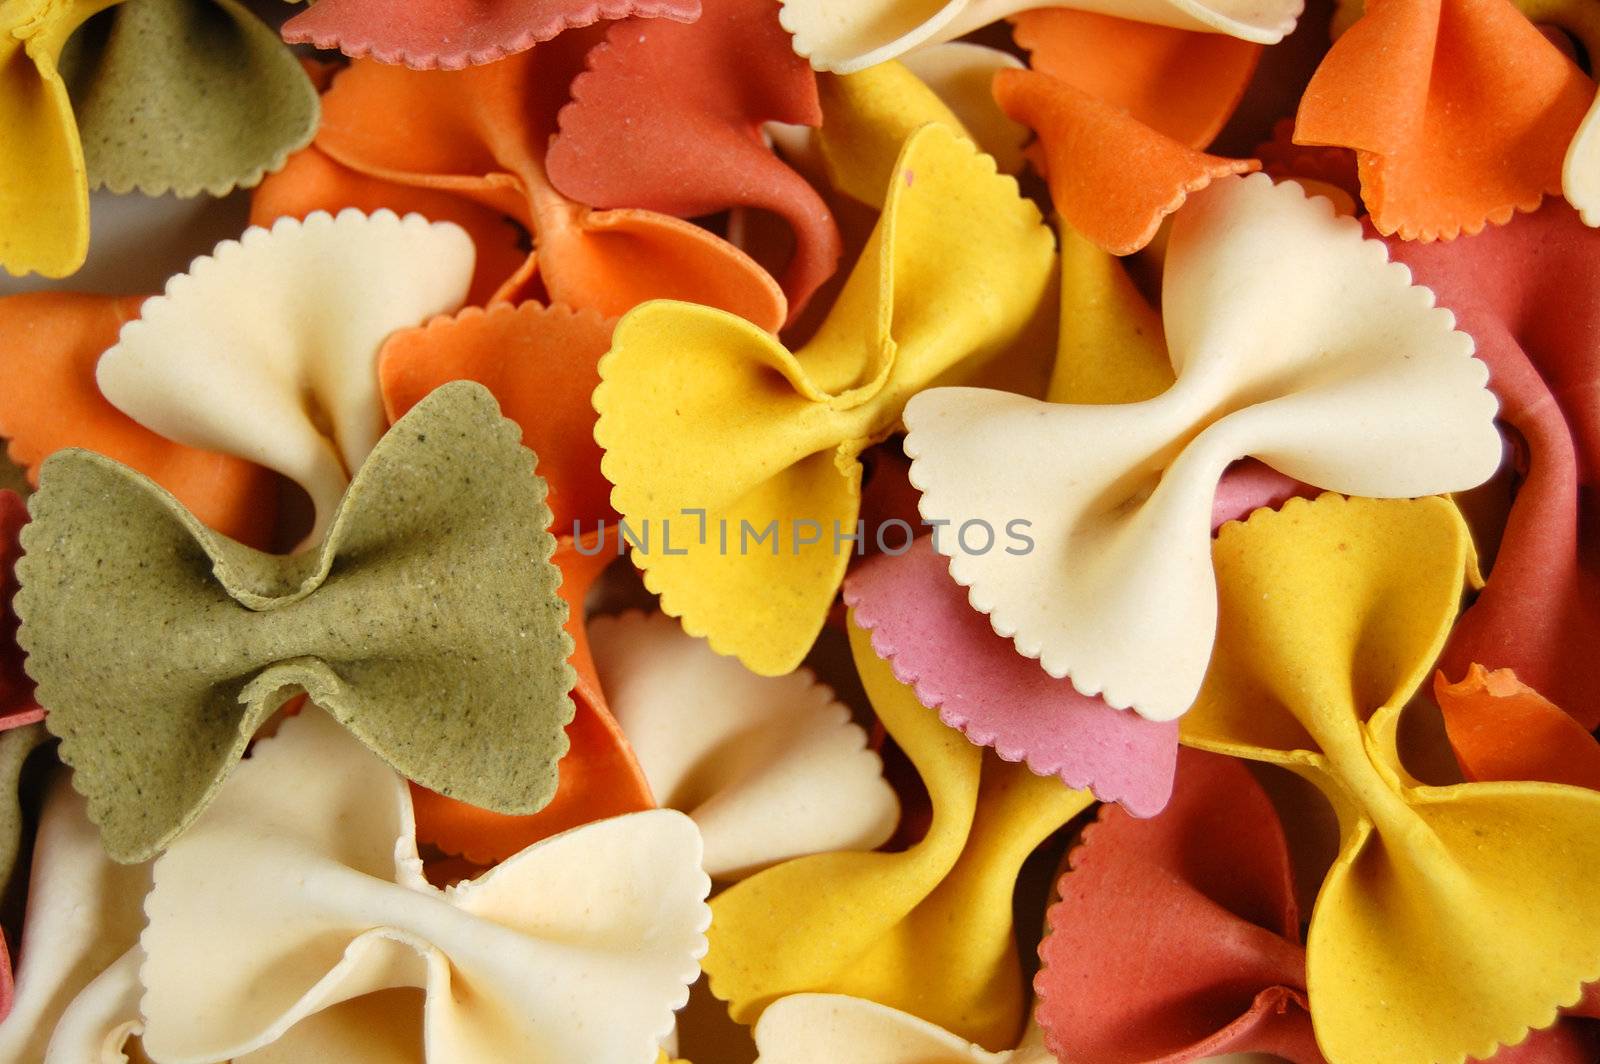 Many different flavors of fresh farfalle pasta. Italian food background.